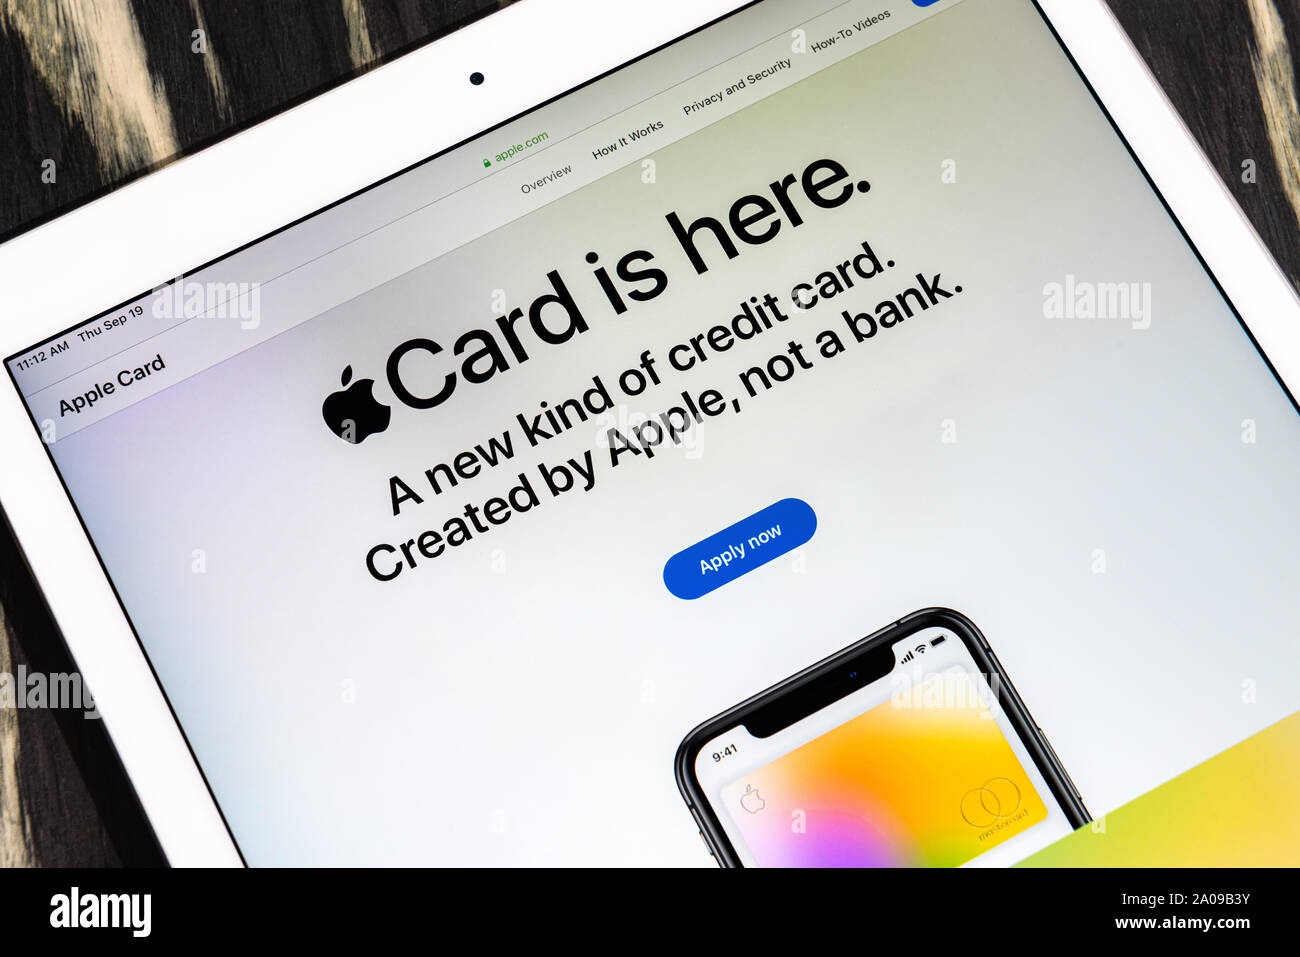 Kyiv, Ukraine - September 19, 2019: A close-up shot of apple.com website with an announcement about the release of Apple Card, a new kind of banking c Stock Photo